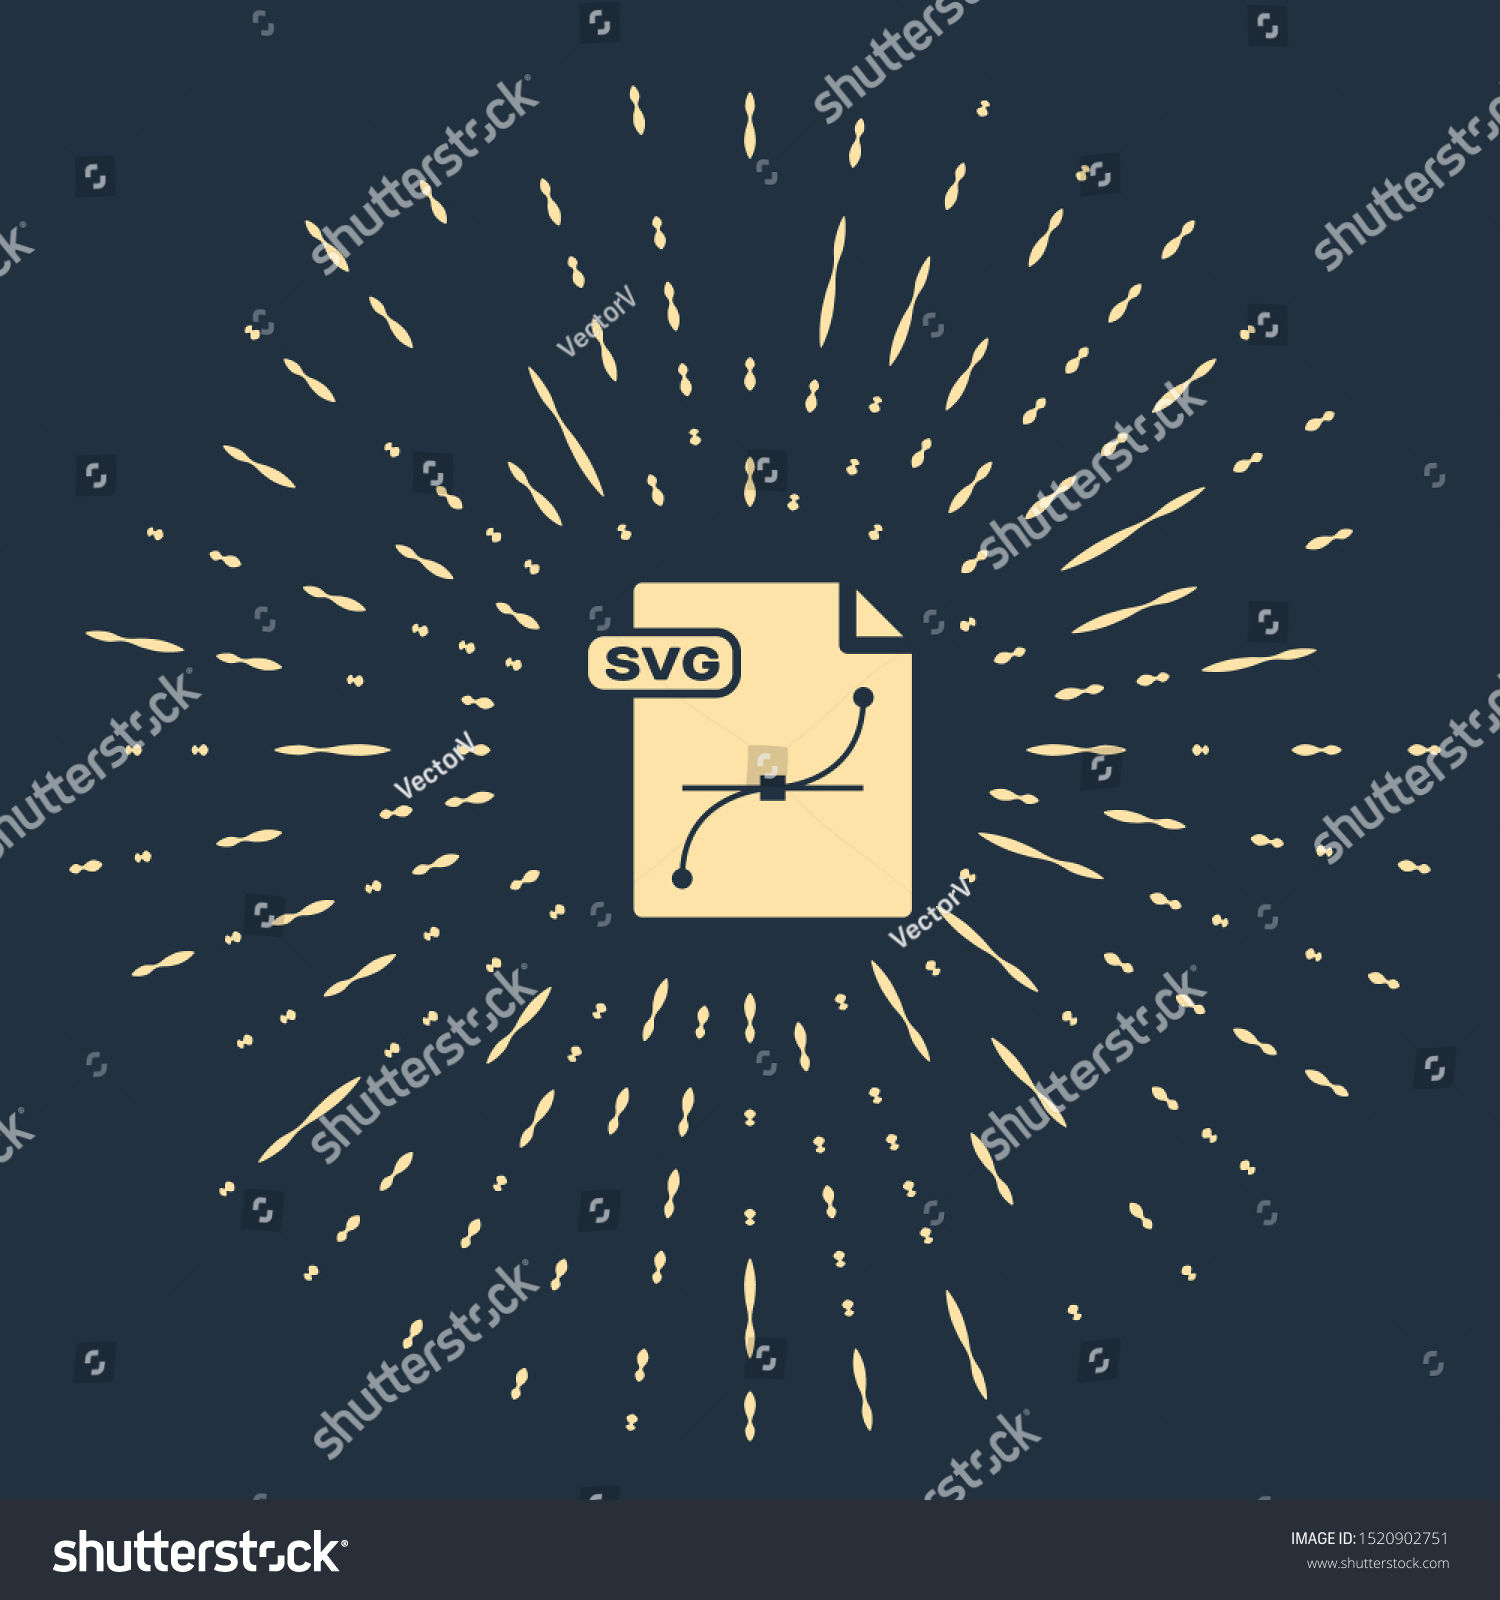 SVG of Beige SVG file document. Download svg button icon isolated on dark blue background. SVG file symbol. Abstract circle random dots. Vector Illustration svg